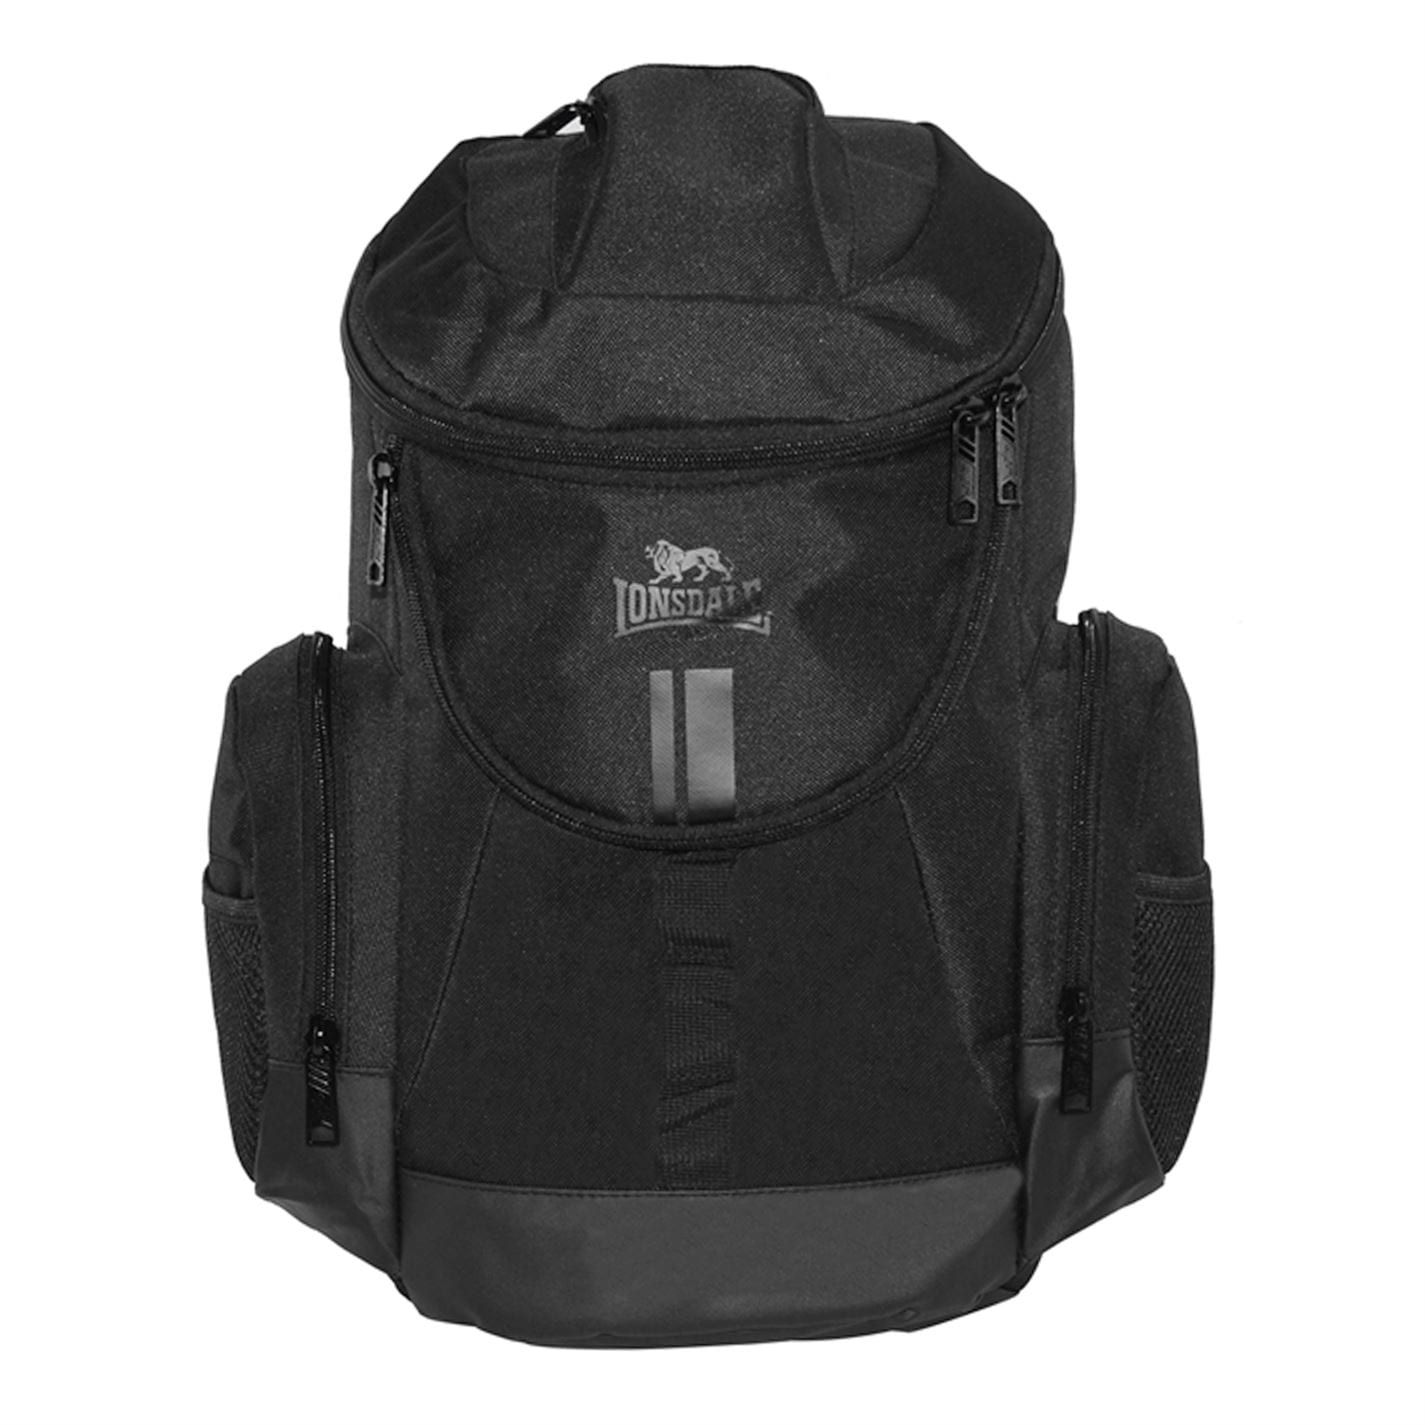 <strong>Lonsdale Niagara Backpack</strong><br><br> Great for travelling this Lonsdale Niagara Backpack features eight pockets one of which in a phone pocket and another inside, offering plenty of room for storing your goods. This Lonsdale backpack includes secure, adjustable and padded straps to ensure your comfort and security.<br>> Lonsdale backpack<br>> Eight pockets including one interior and phone pocket<br>> Headphone port to top pocket<br>> Padded, adjustable straps<br>> Lonsdale branding<br>> W34 x D19 x H38cm